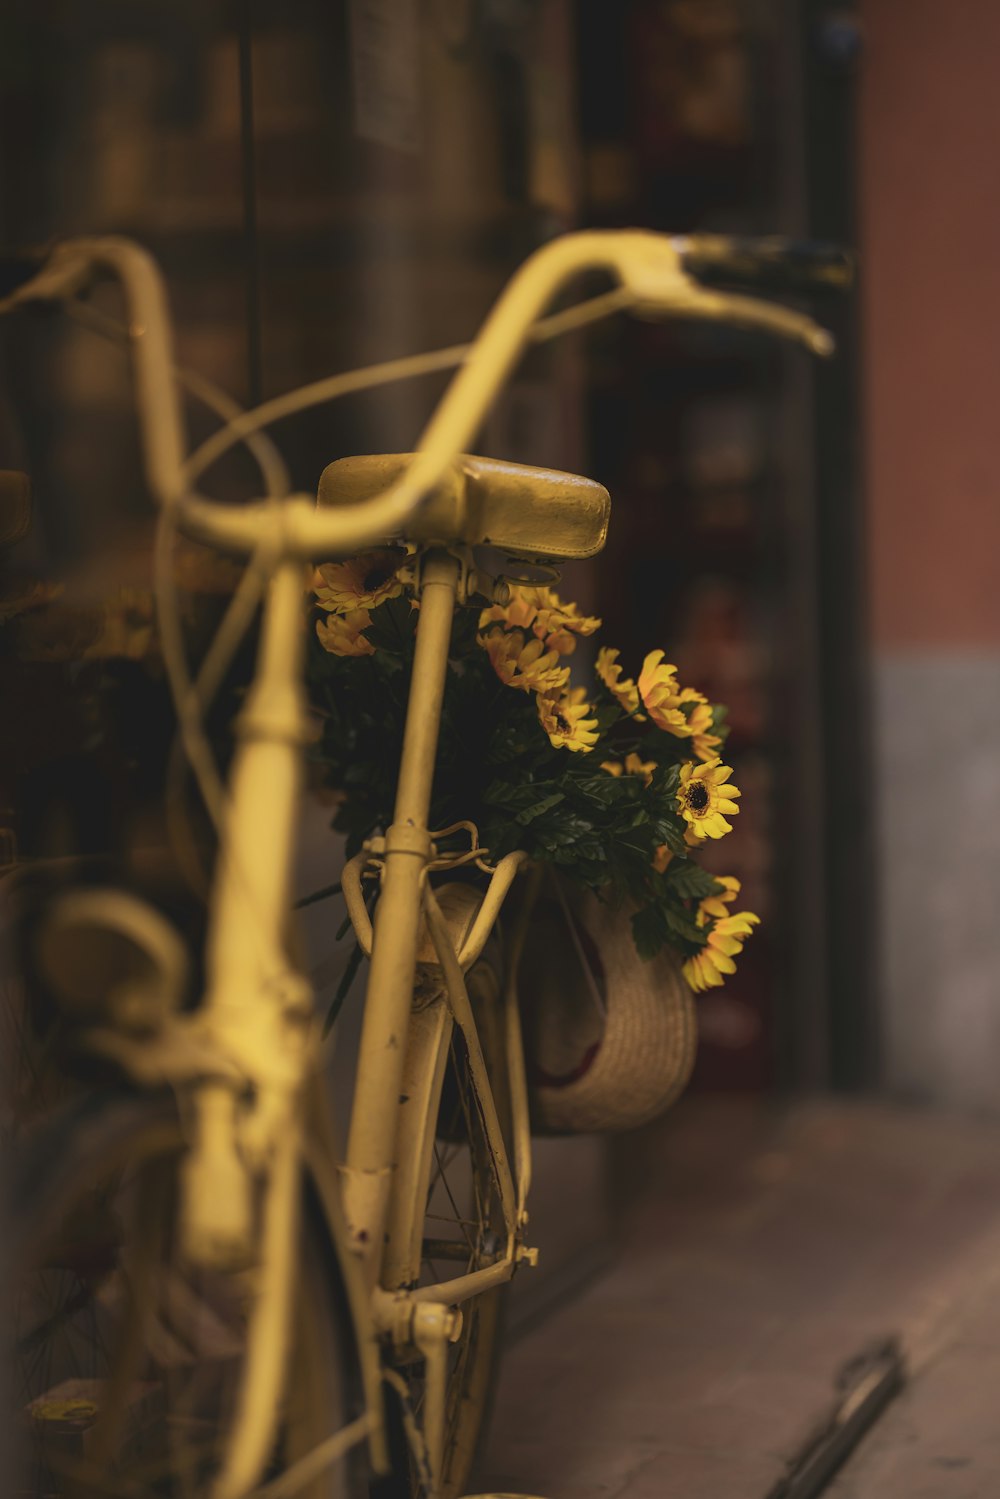 a yellow bicycle with a basket full of flowers